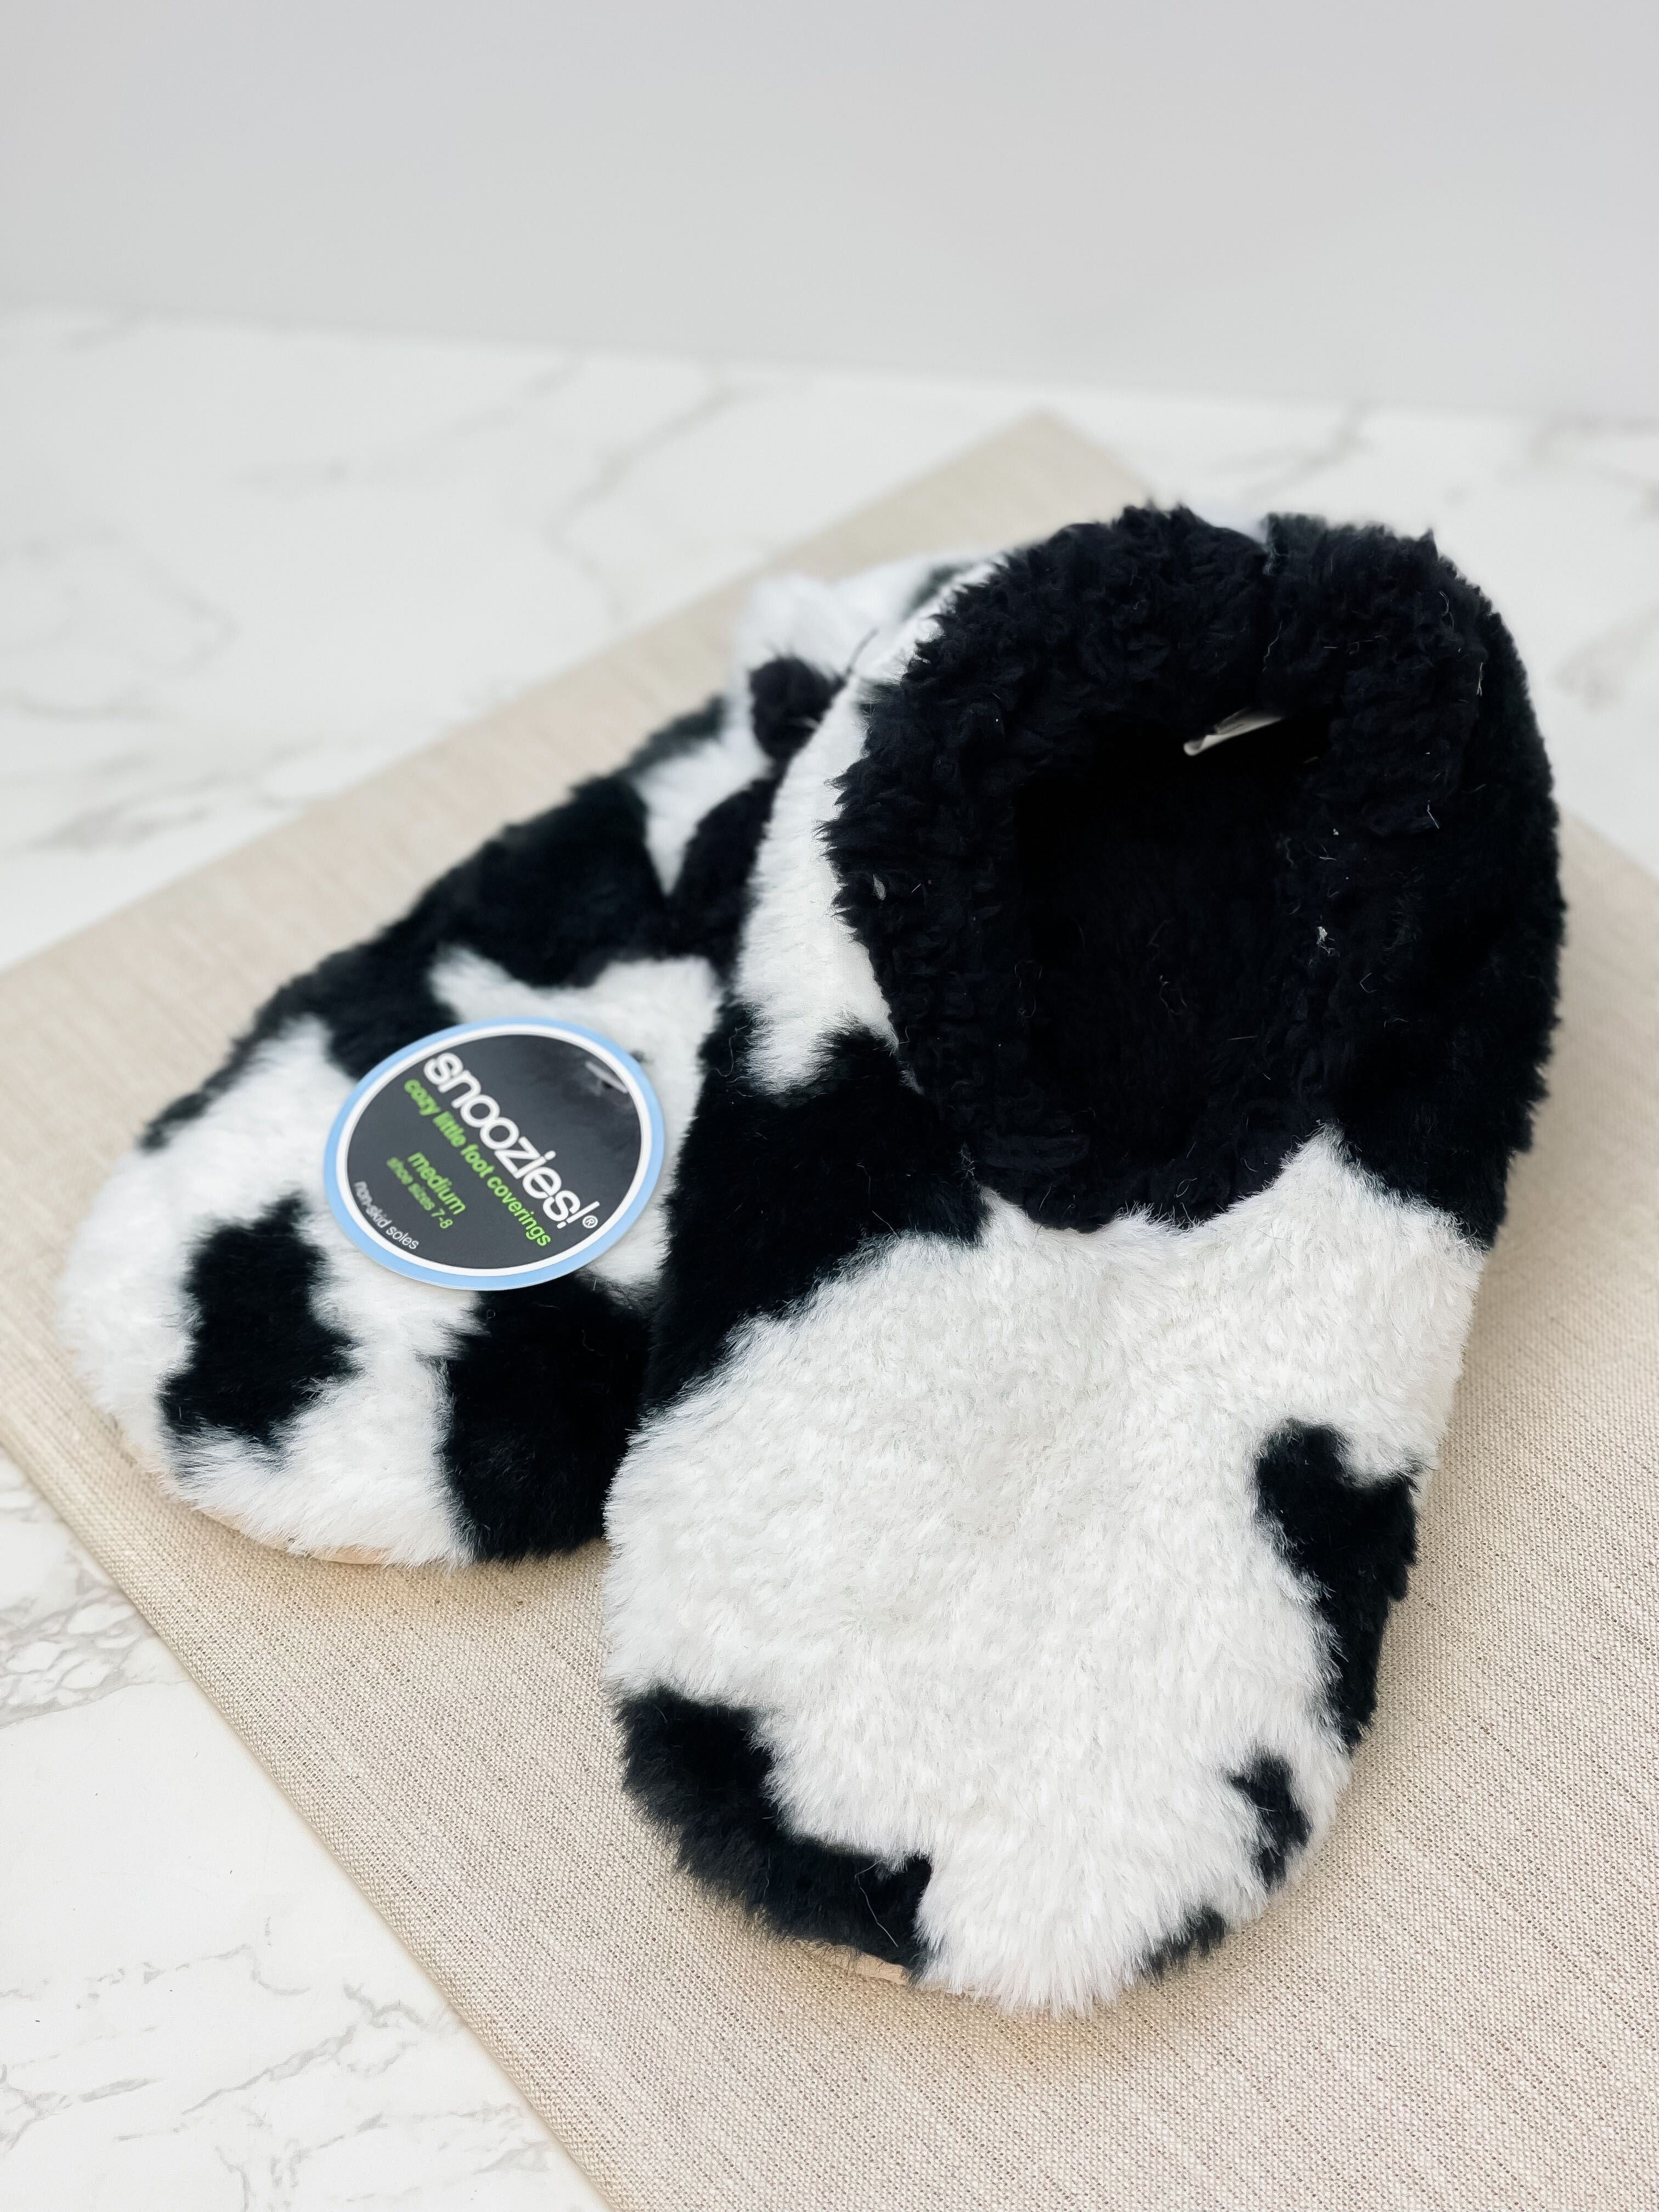 Snoozies! Slippers - Holy Cow Black